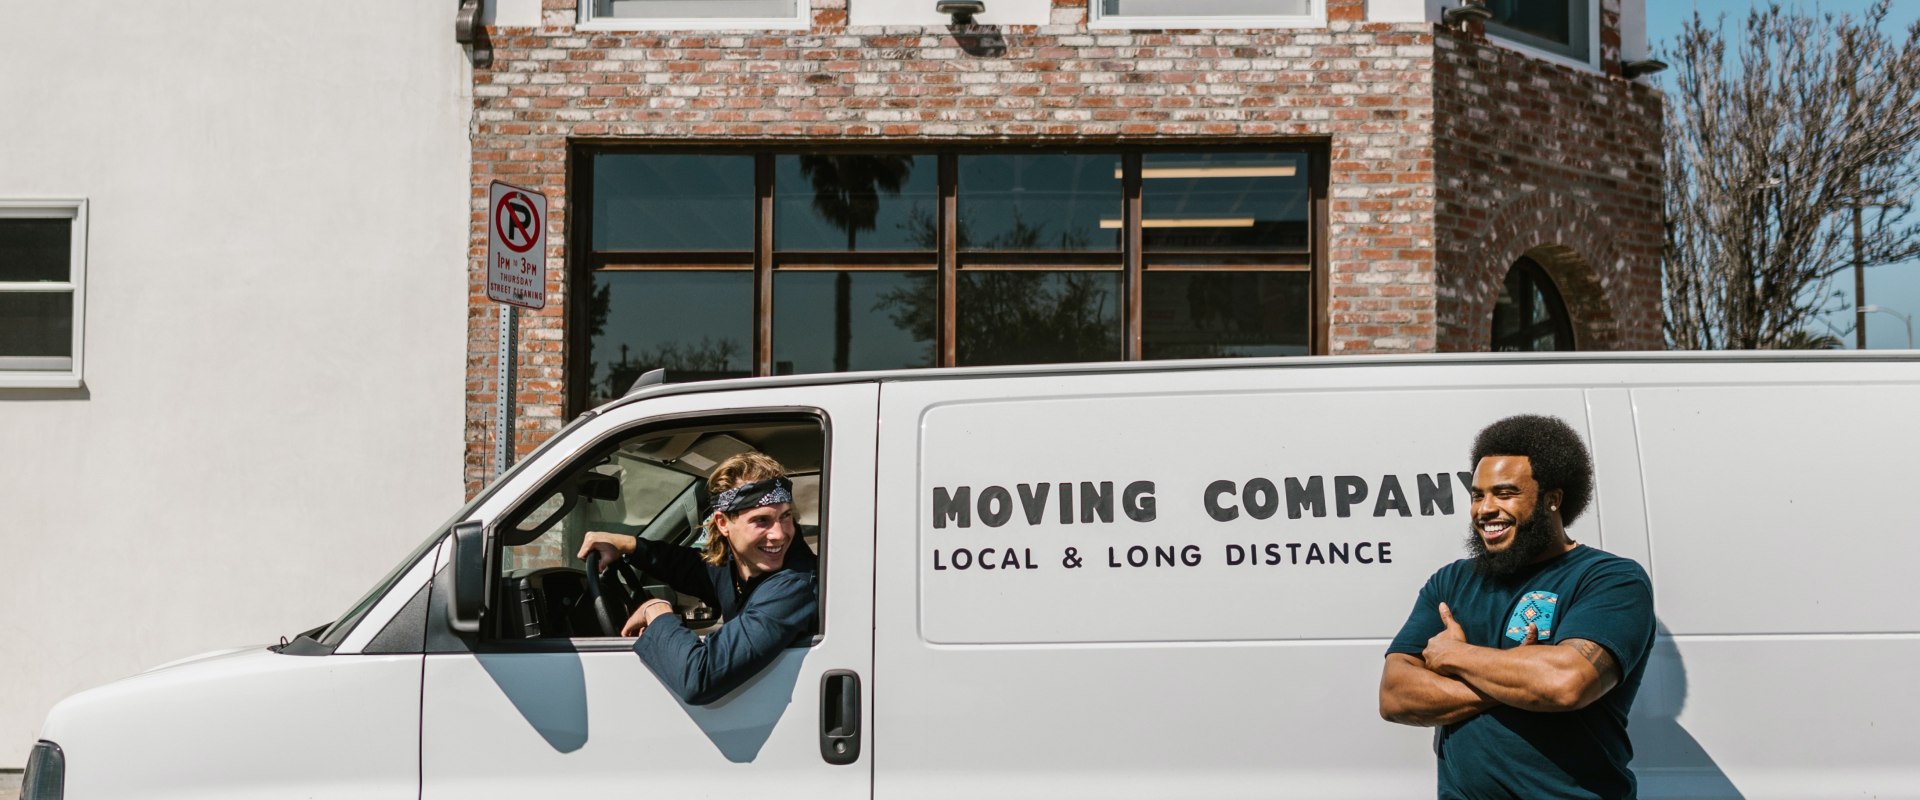 What is a Moving Business Called?